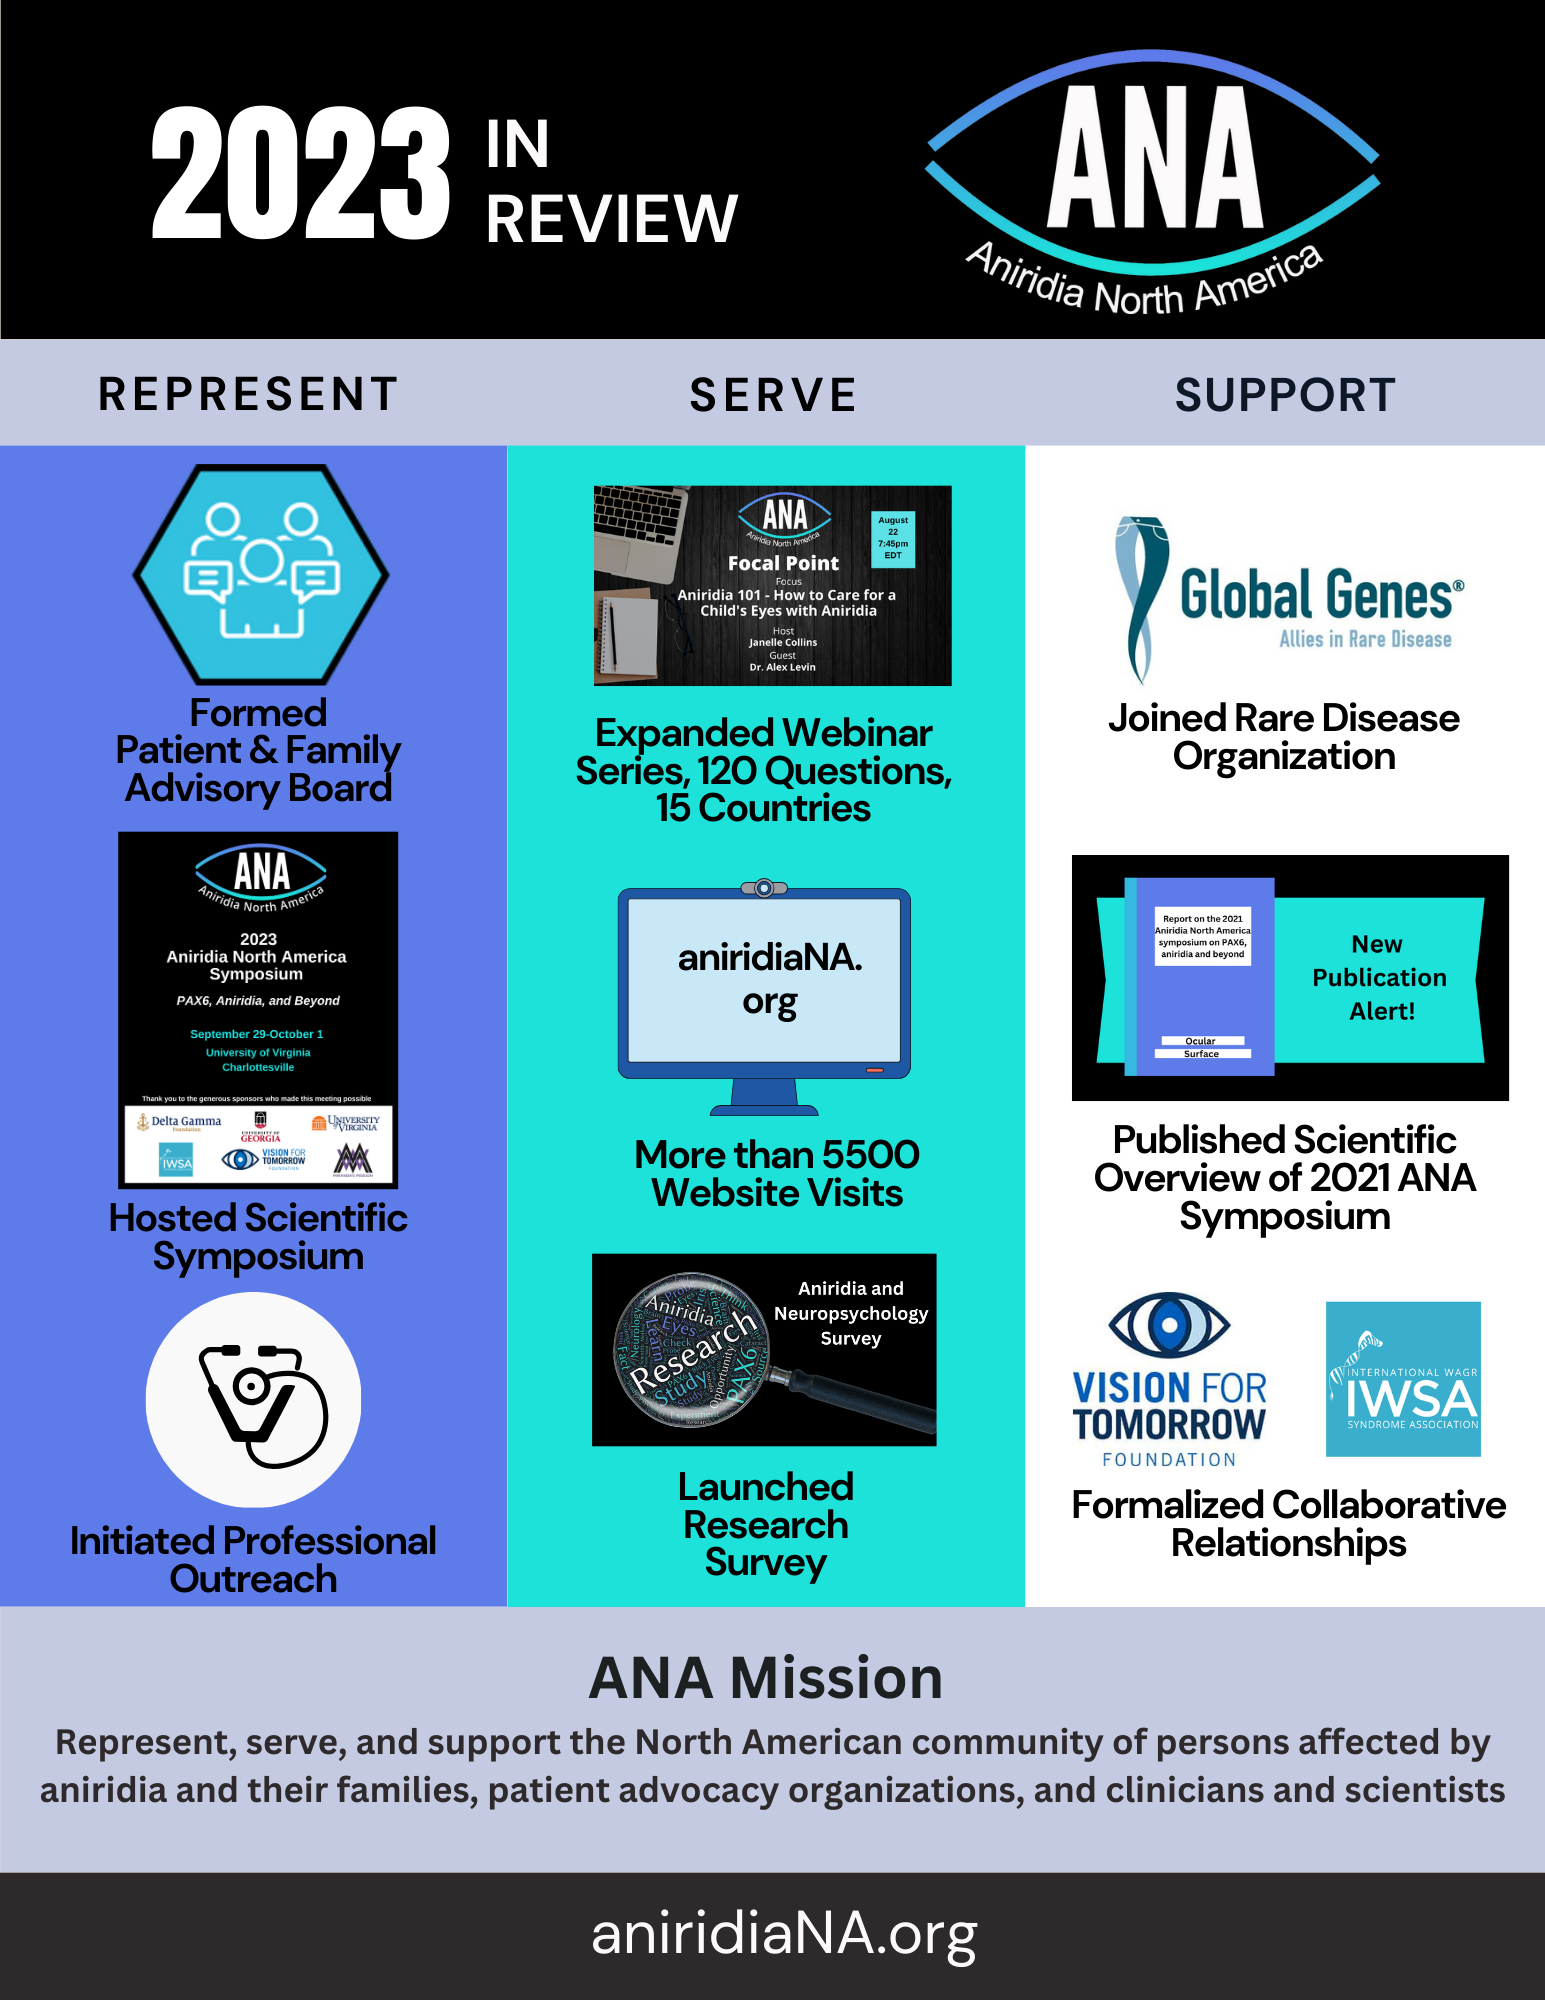 Infographic with title: 2023 In Review and ANA logo Under the "Represent" column are graphics for the following: Formed Patient and Family Advisory Board, Hosted Scientific Symposium, Initiated Professional Outreach Under the "Serve" column, there are graphics for the following: Expanded webinar series, 120 questions, 15 countries, More than 5500 website visits, Launched Research survey Under the "Support" column, there are graphics for the following: Joined Global Genes rare disease organization, Published scientific Overview of the 2021 ANA Symposium, Formalized Collaborative relationships with vision for tomorrow and International WAGR Syndrome Association